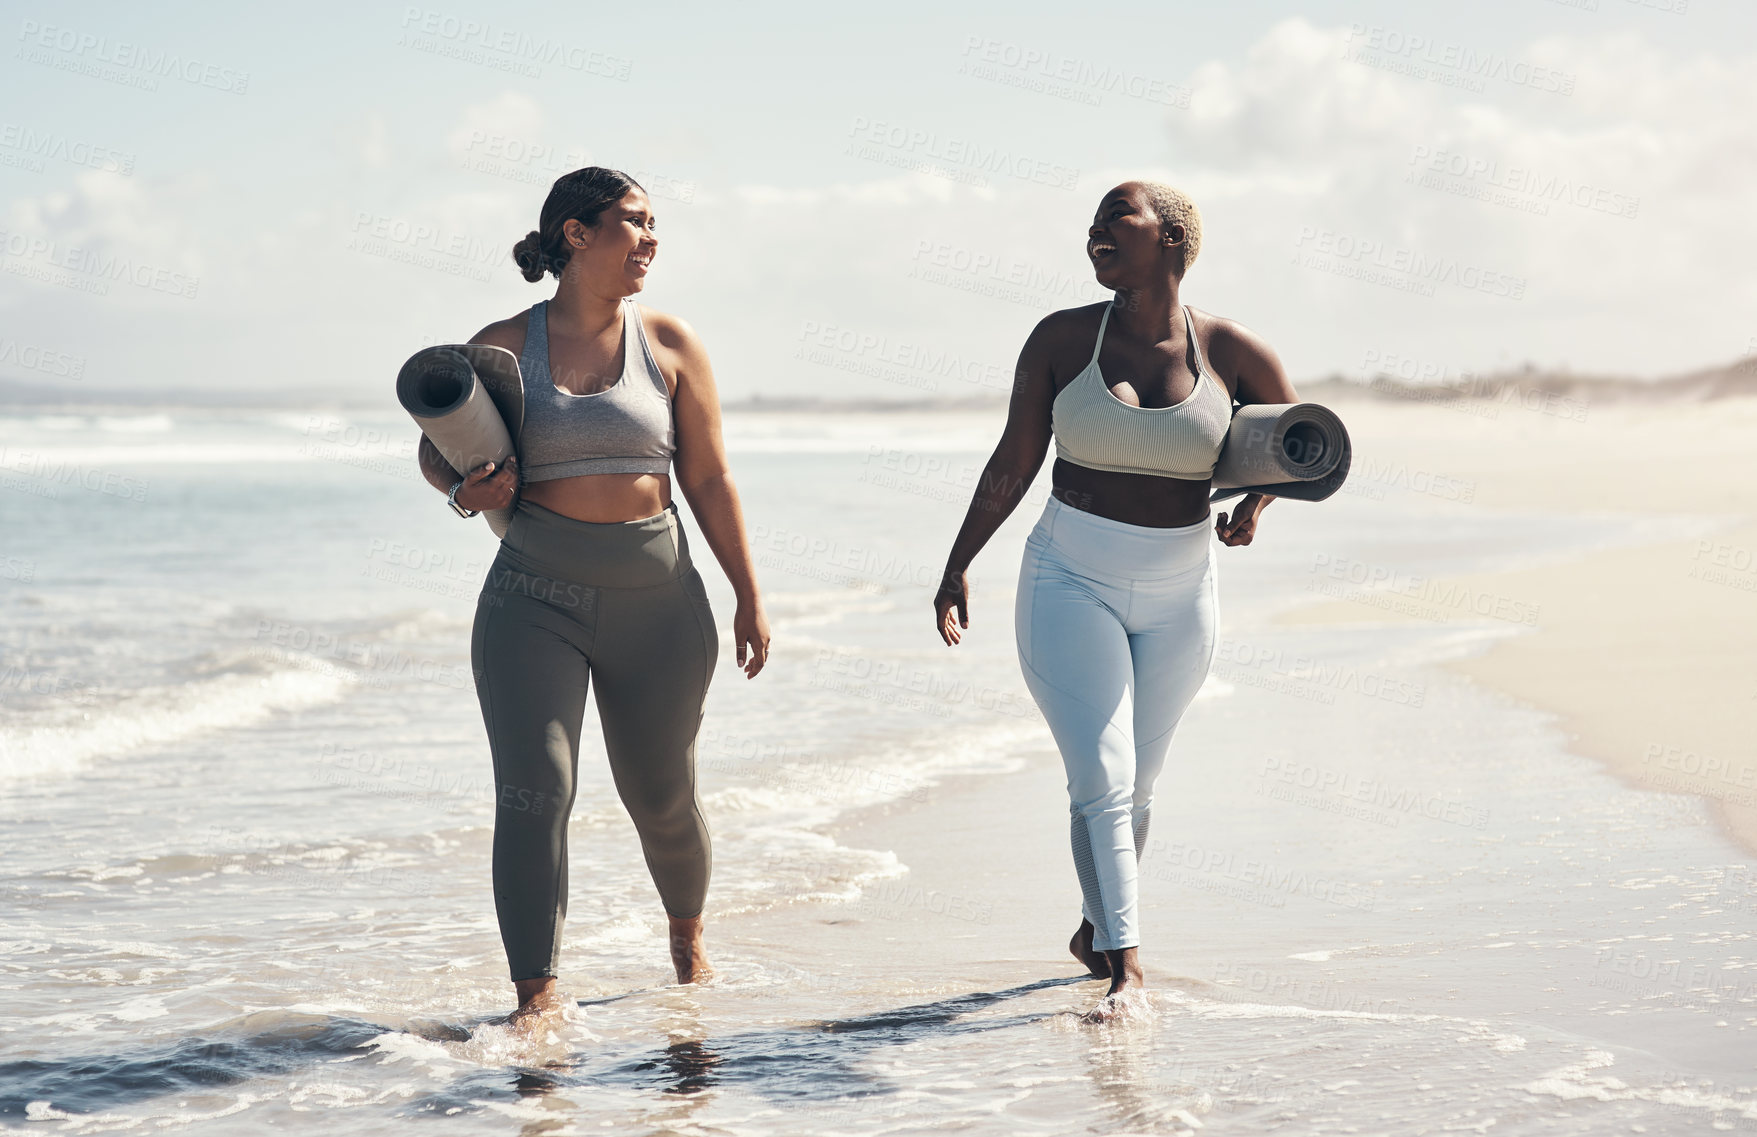 Buy stock photo Shot of two young women walking on the beach with their yoga mats